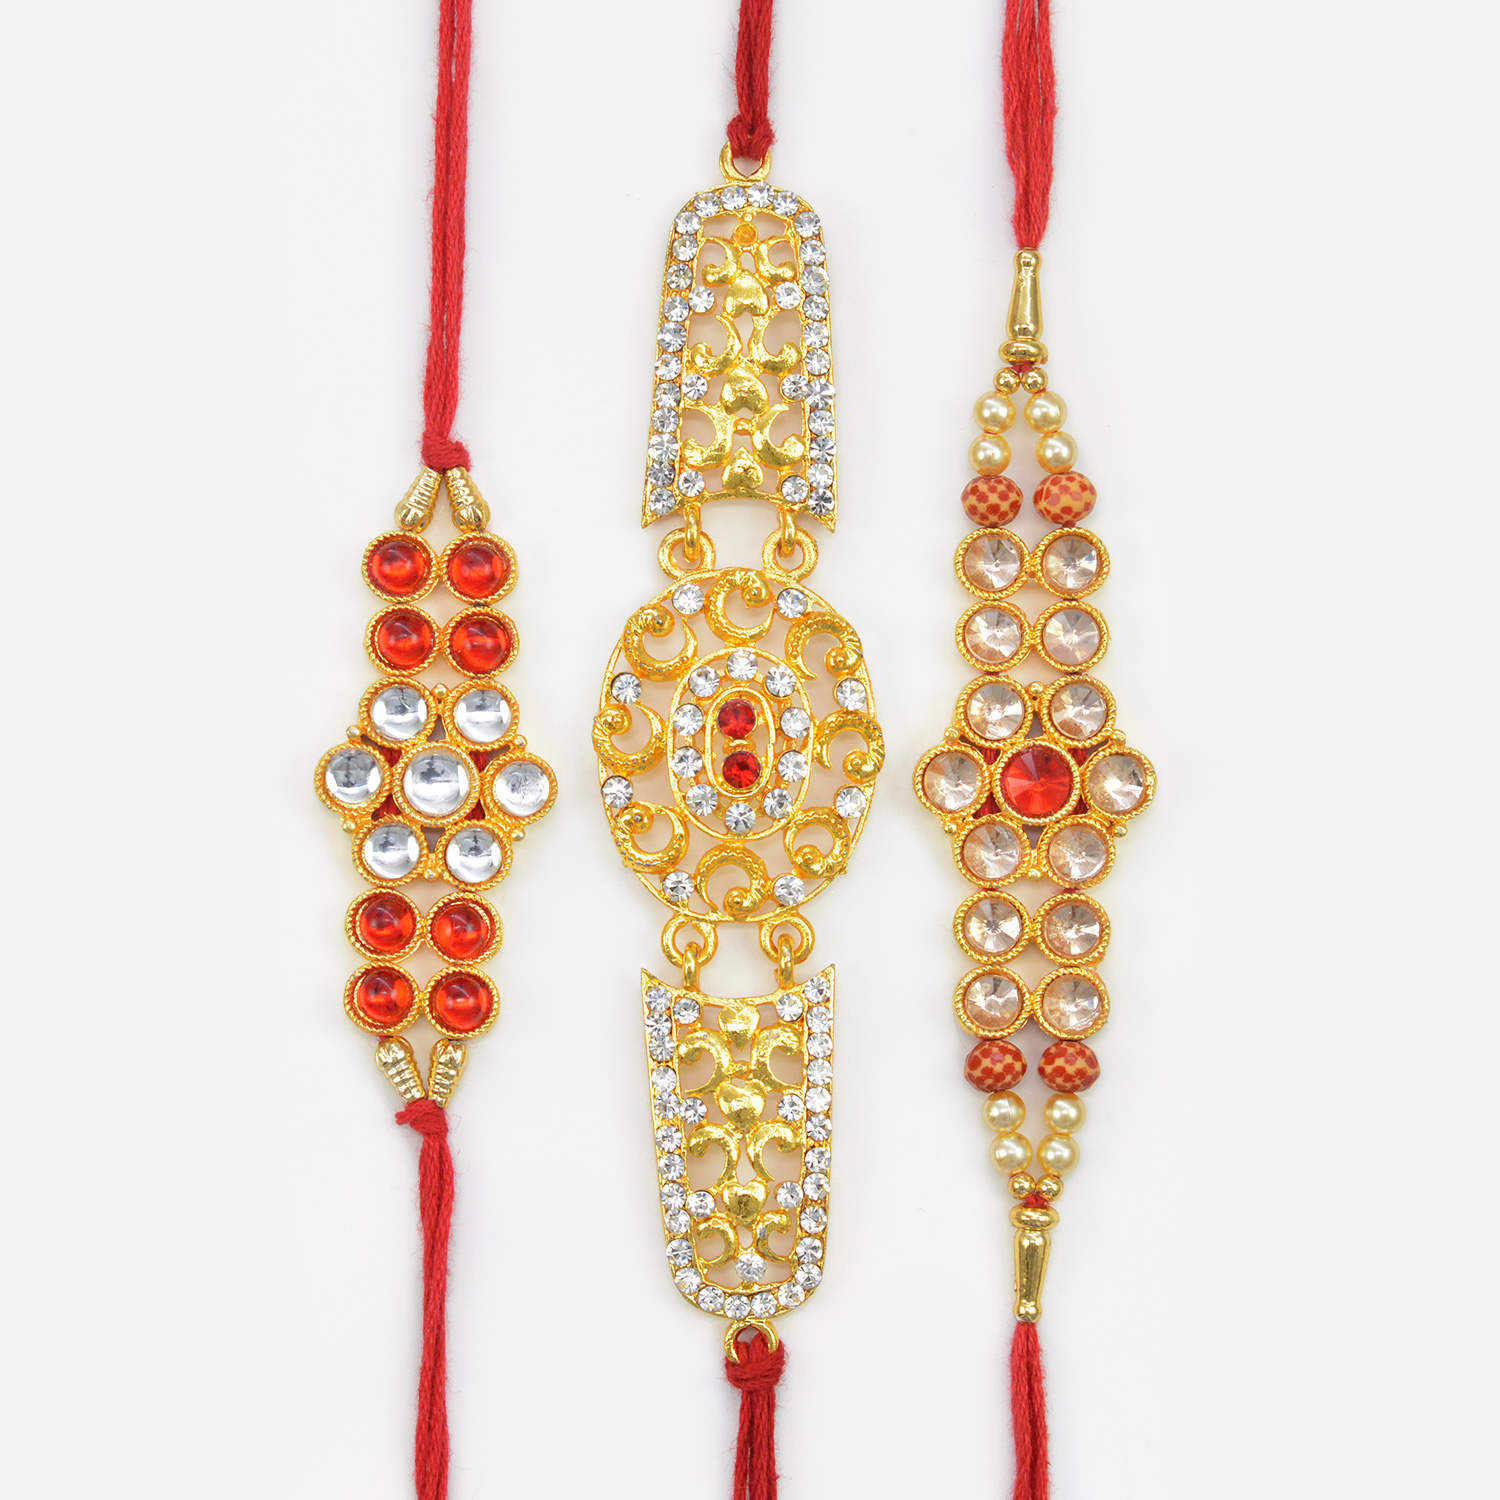 Circular Shape Red and White Jewel Studded Rakhis with Golden New Pattern Awesome Rakhis Set of 3